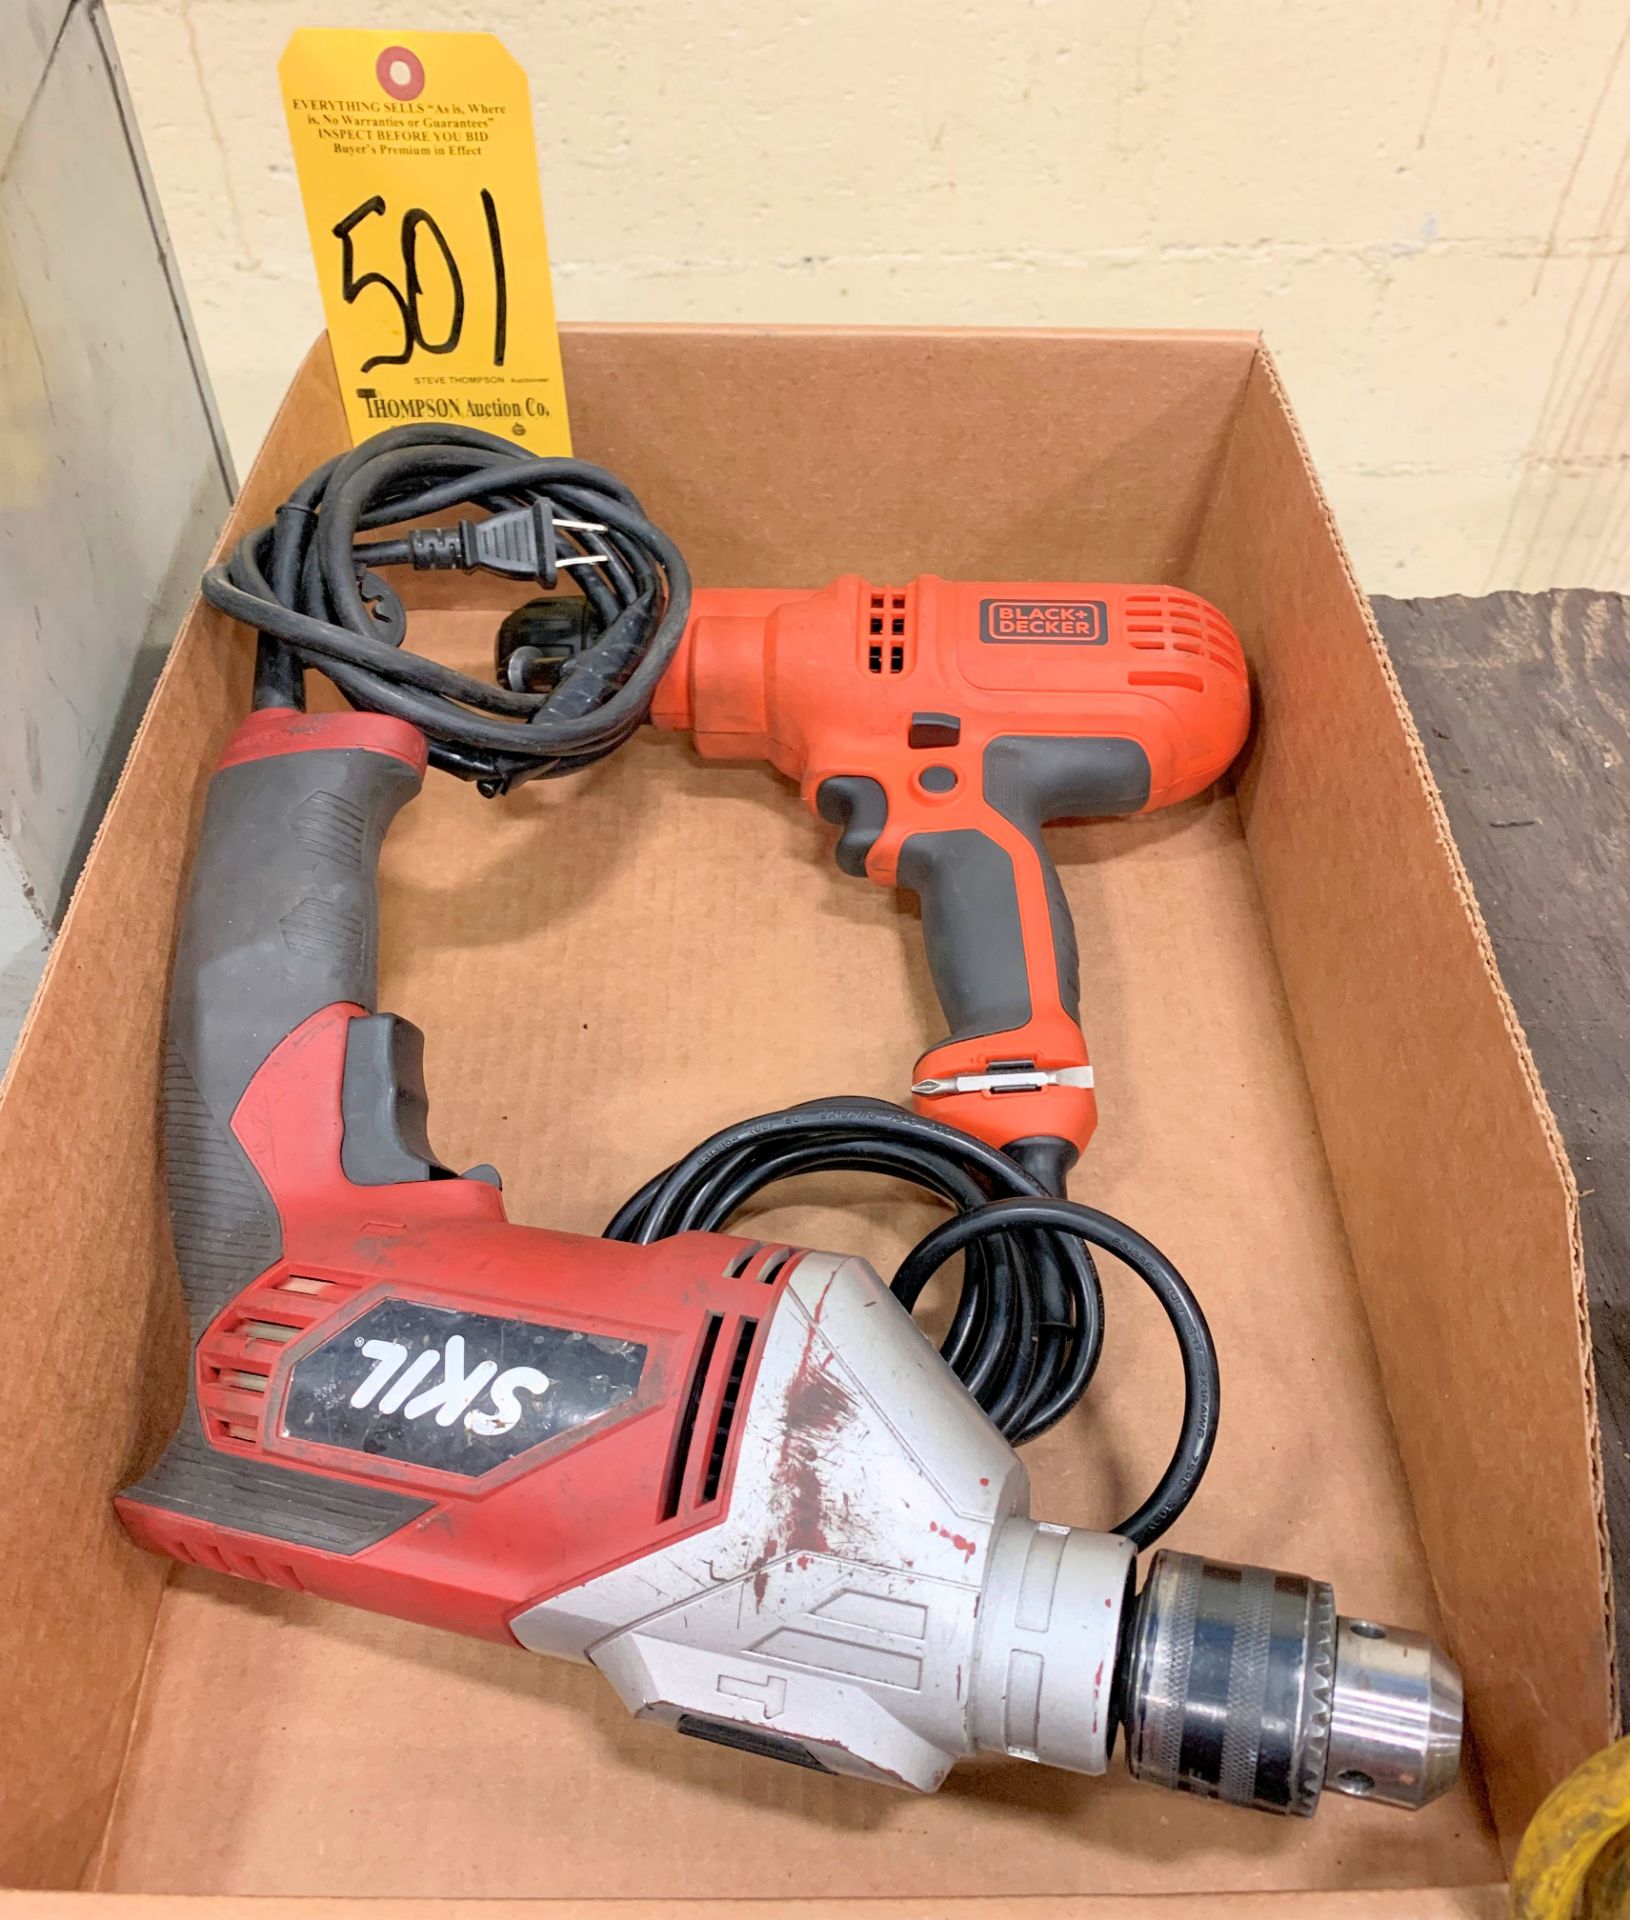 Lot-(1) 1/2" Electric Drill and (1) Black & Decker DR260, 3/8" Electric Drill in (1) Box